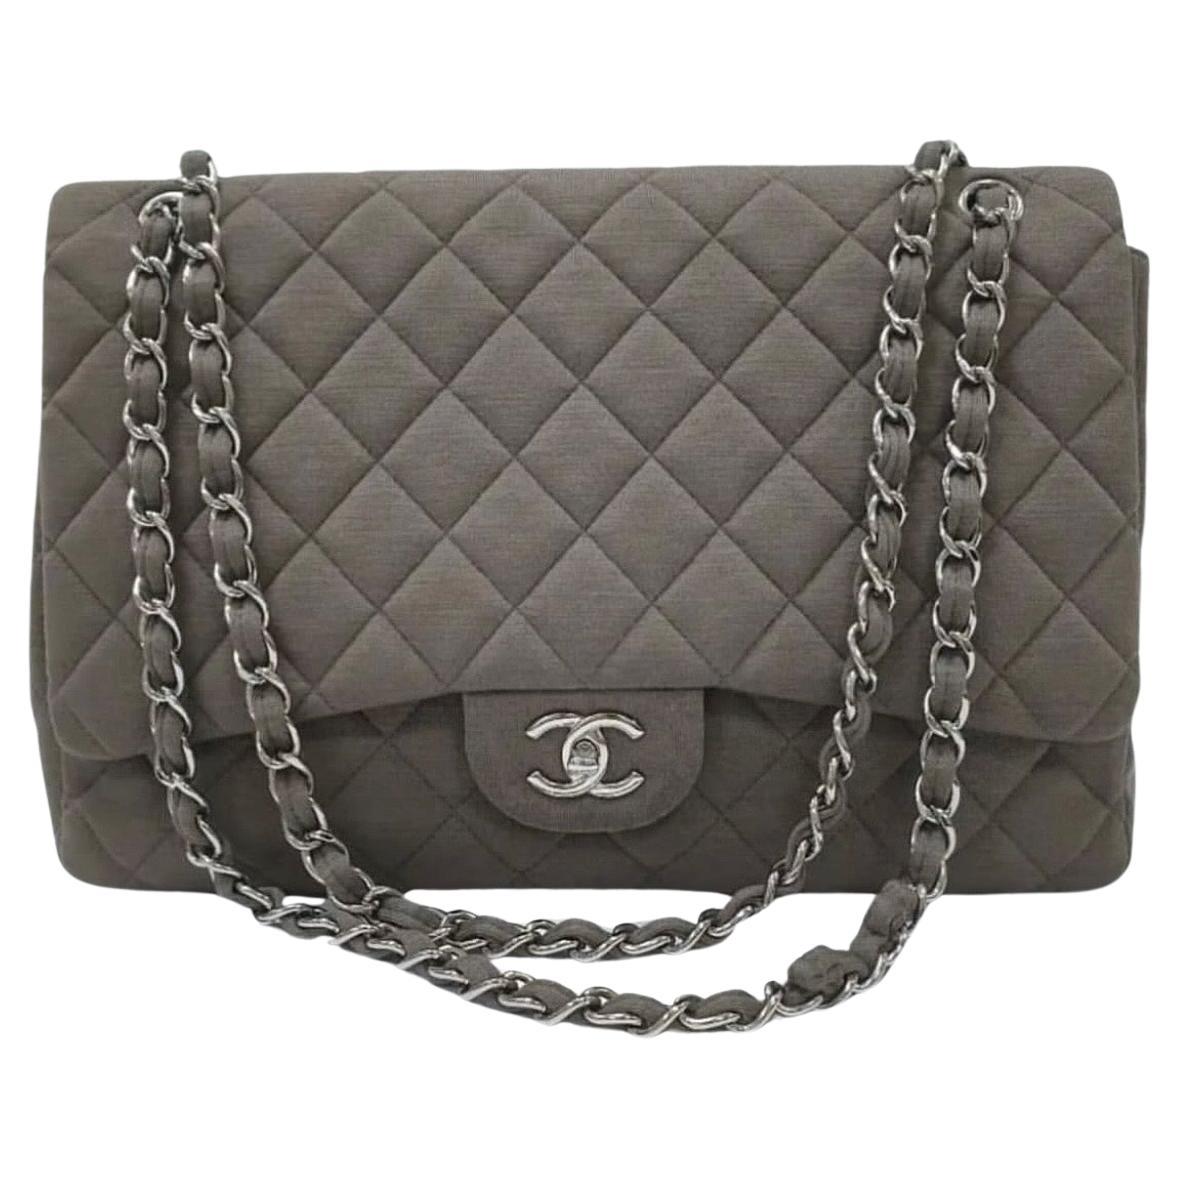 Which is bigger - the maxi or jumbo Chanel bag?